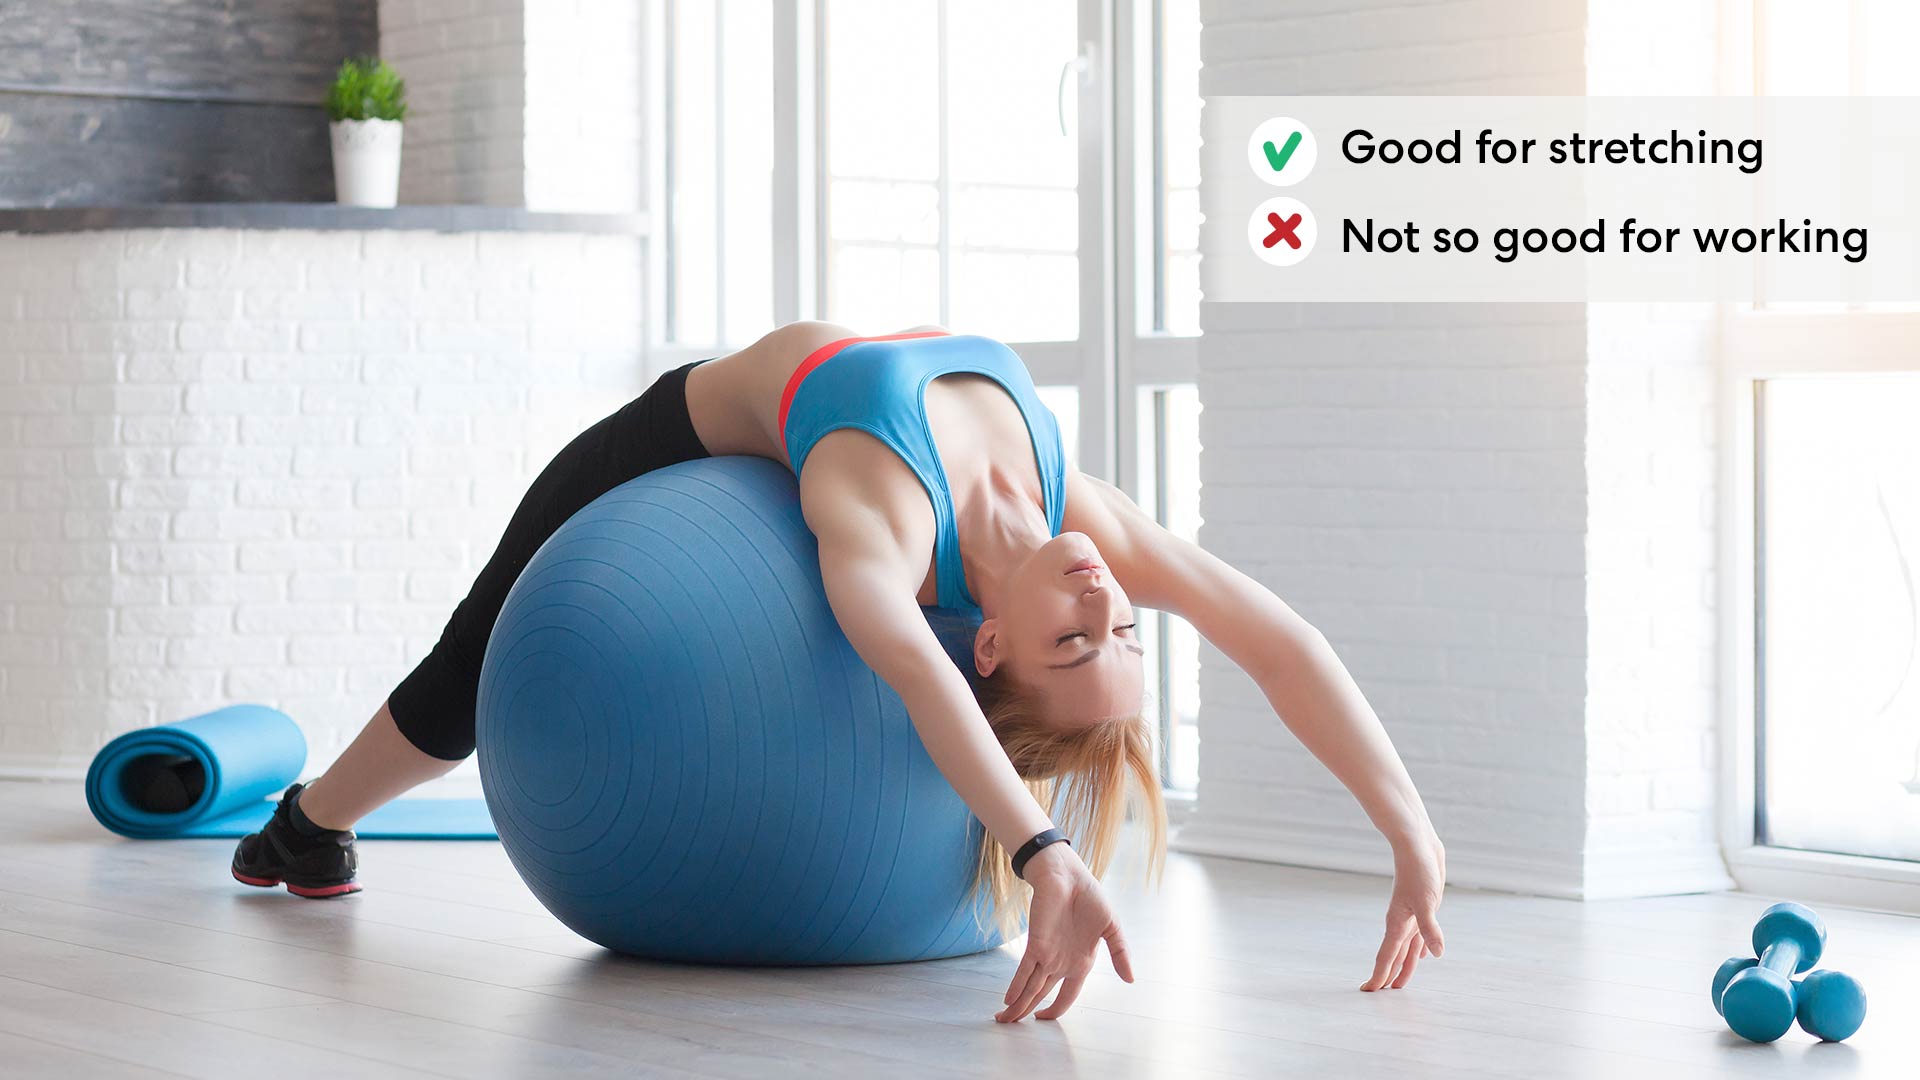 Use a balance ball for stretching, not for working.